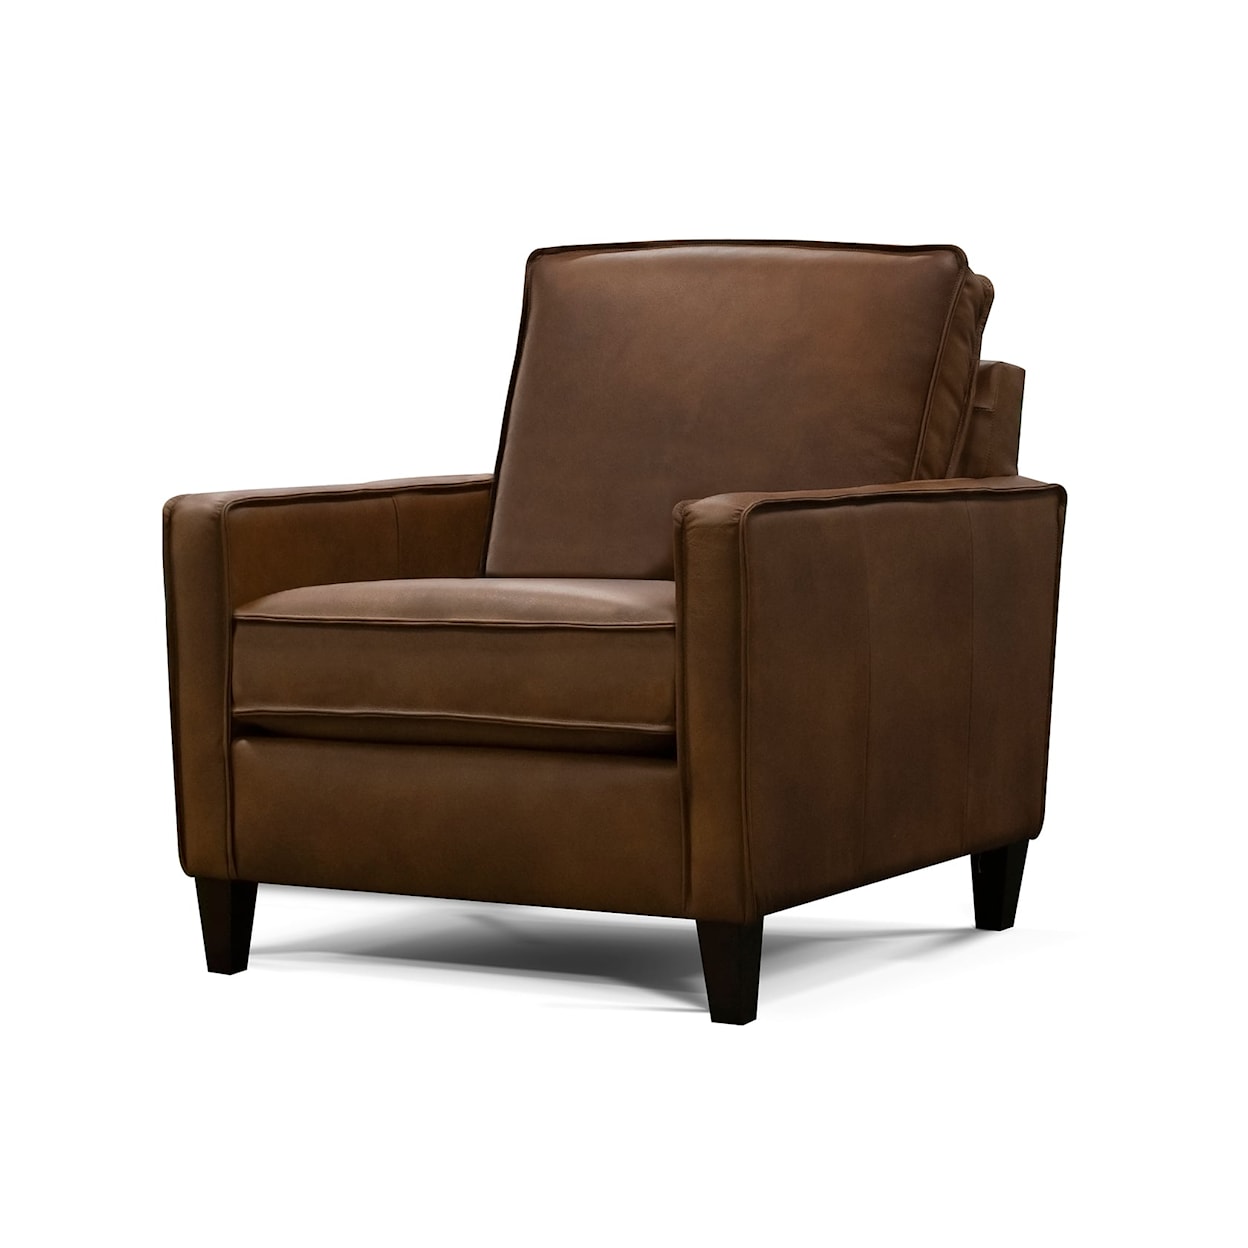 England 4200AL Series Upholstered Chair